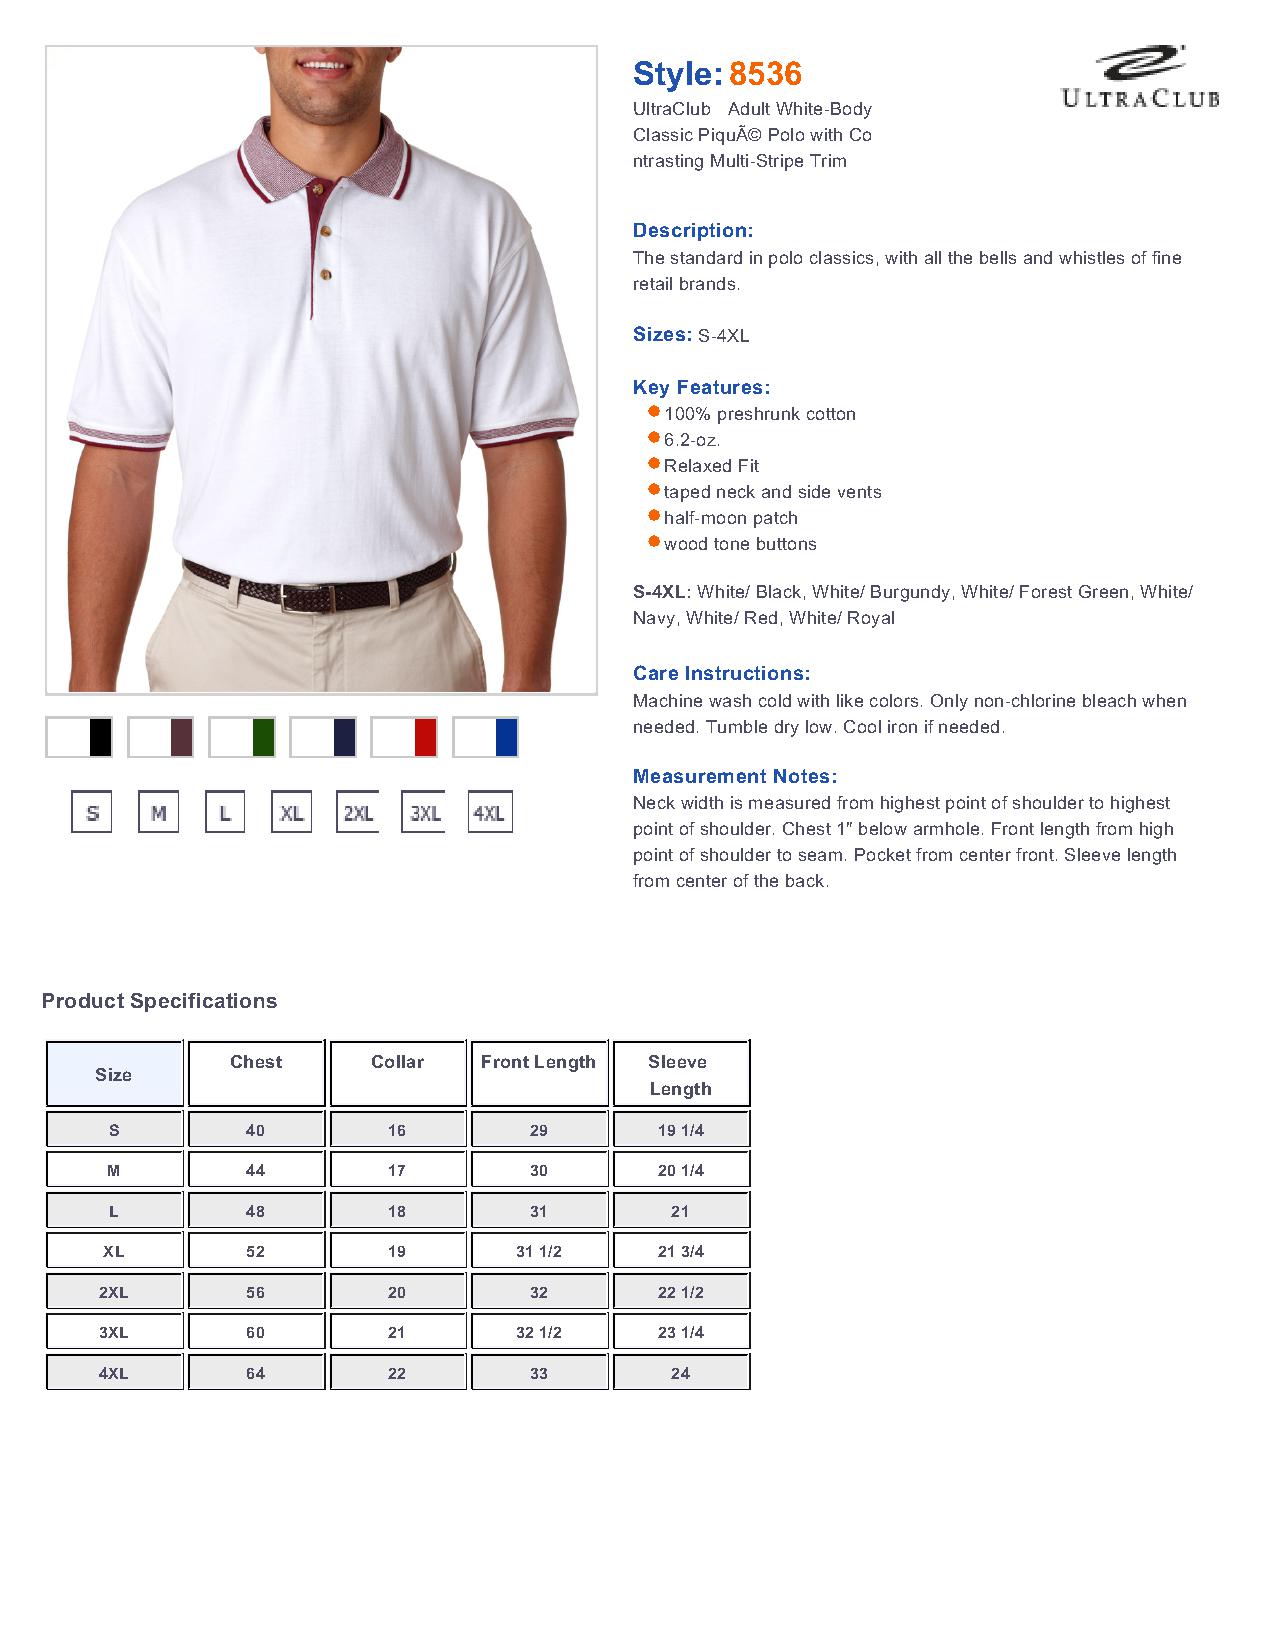 8536 UltraClub Adult White-Body Classic Pique Polo with Contrasting ...